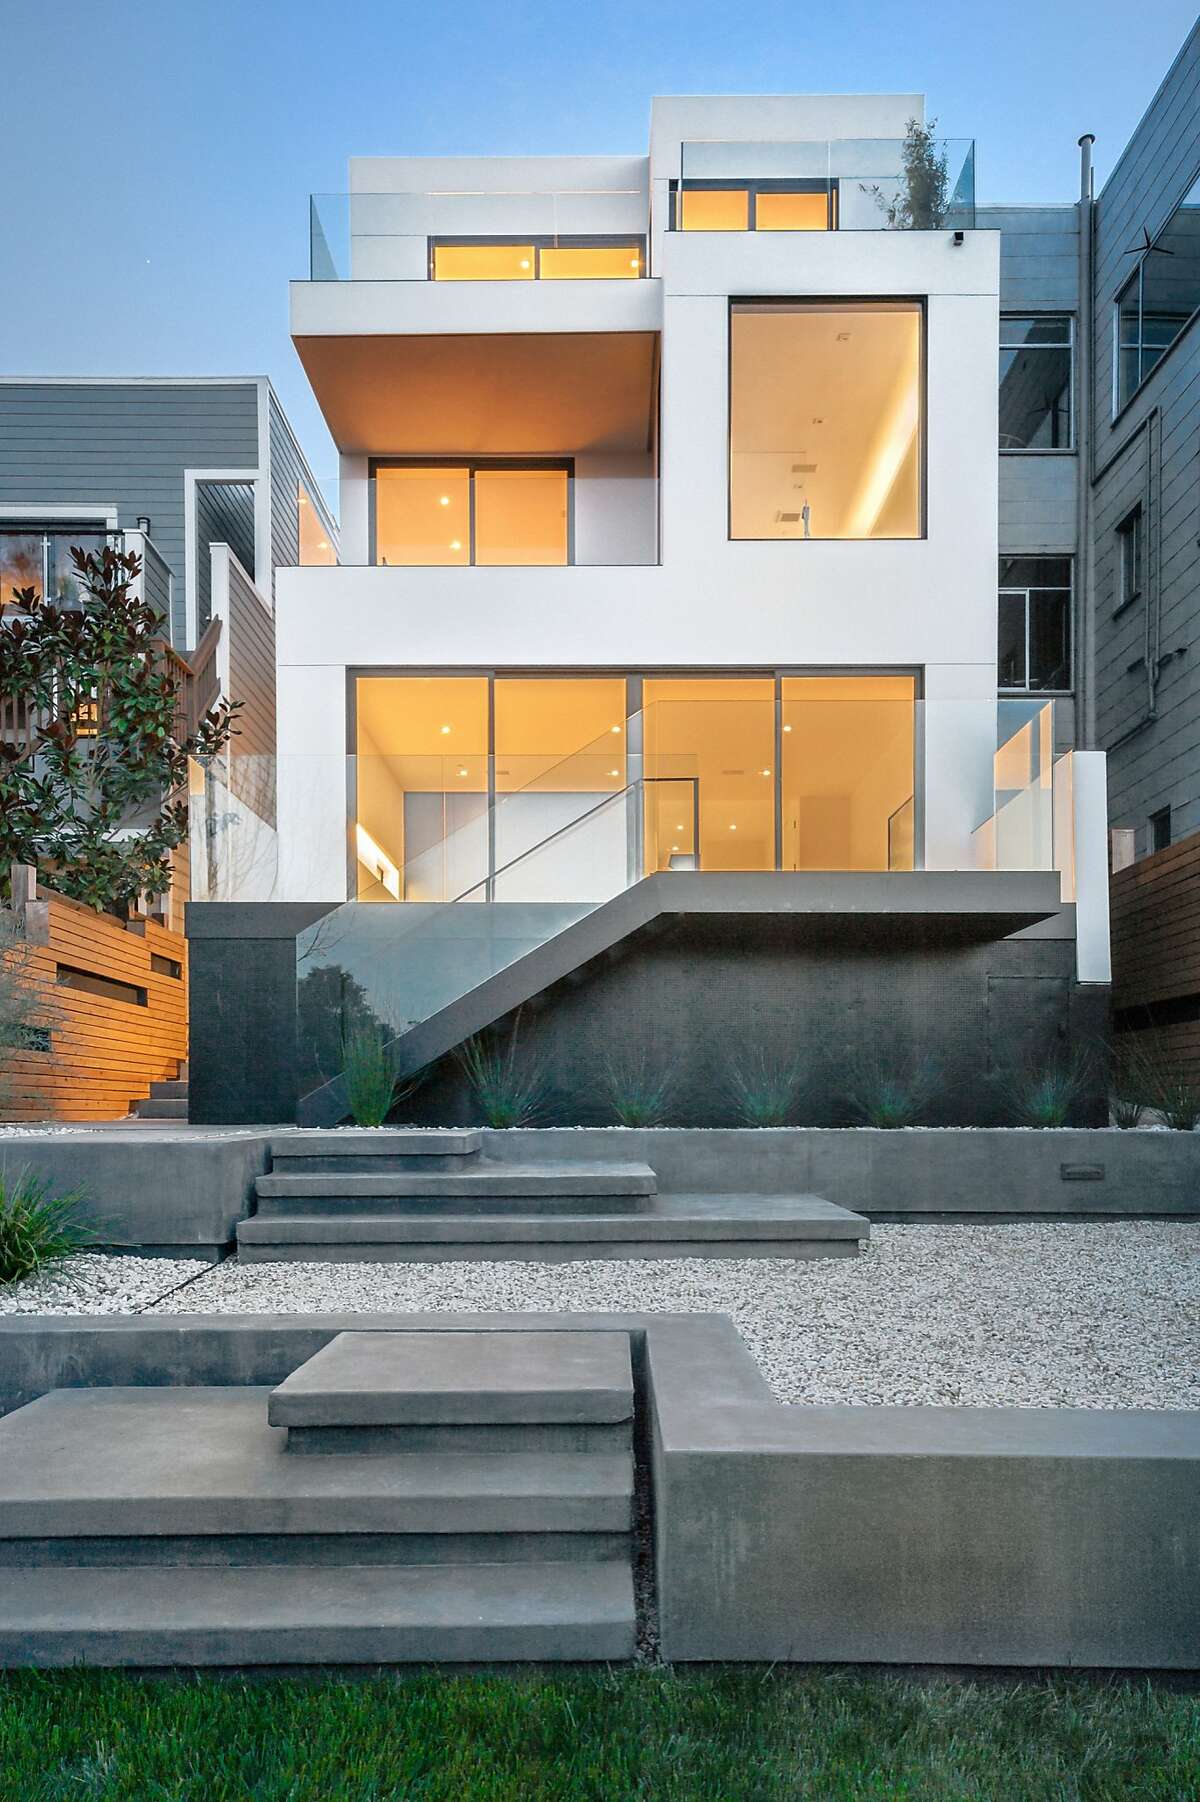 Hot Property: 'Cube House' offers dynamic, modernist design in Noe Valley